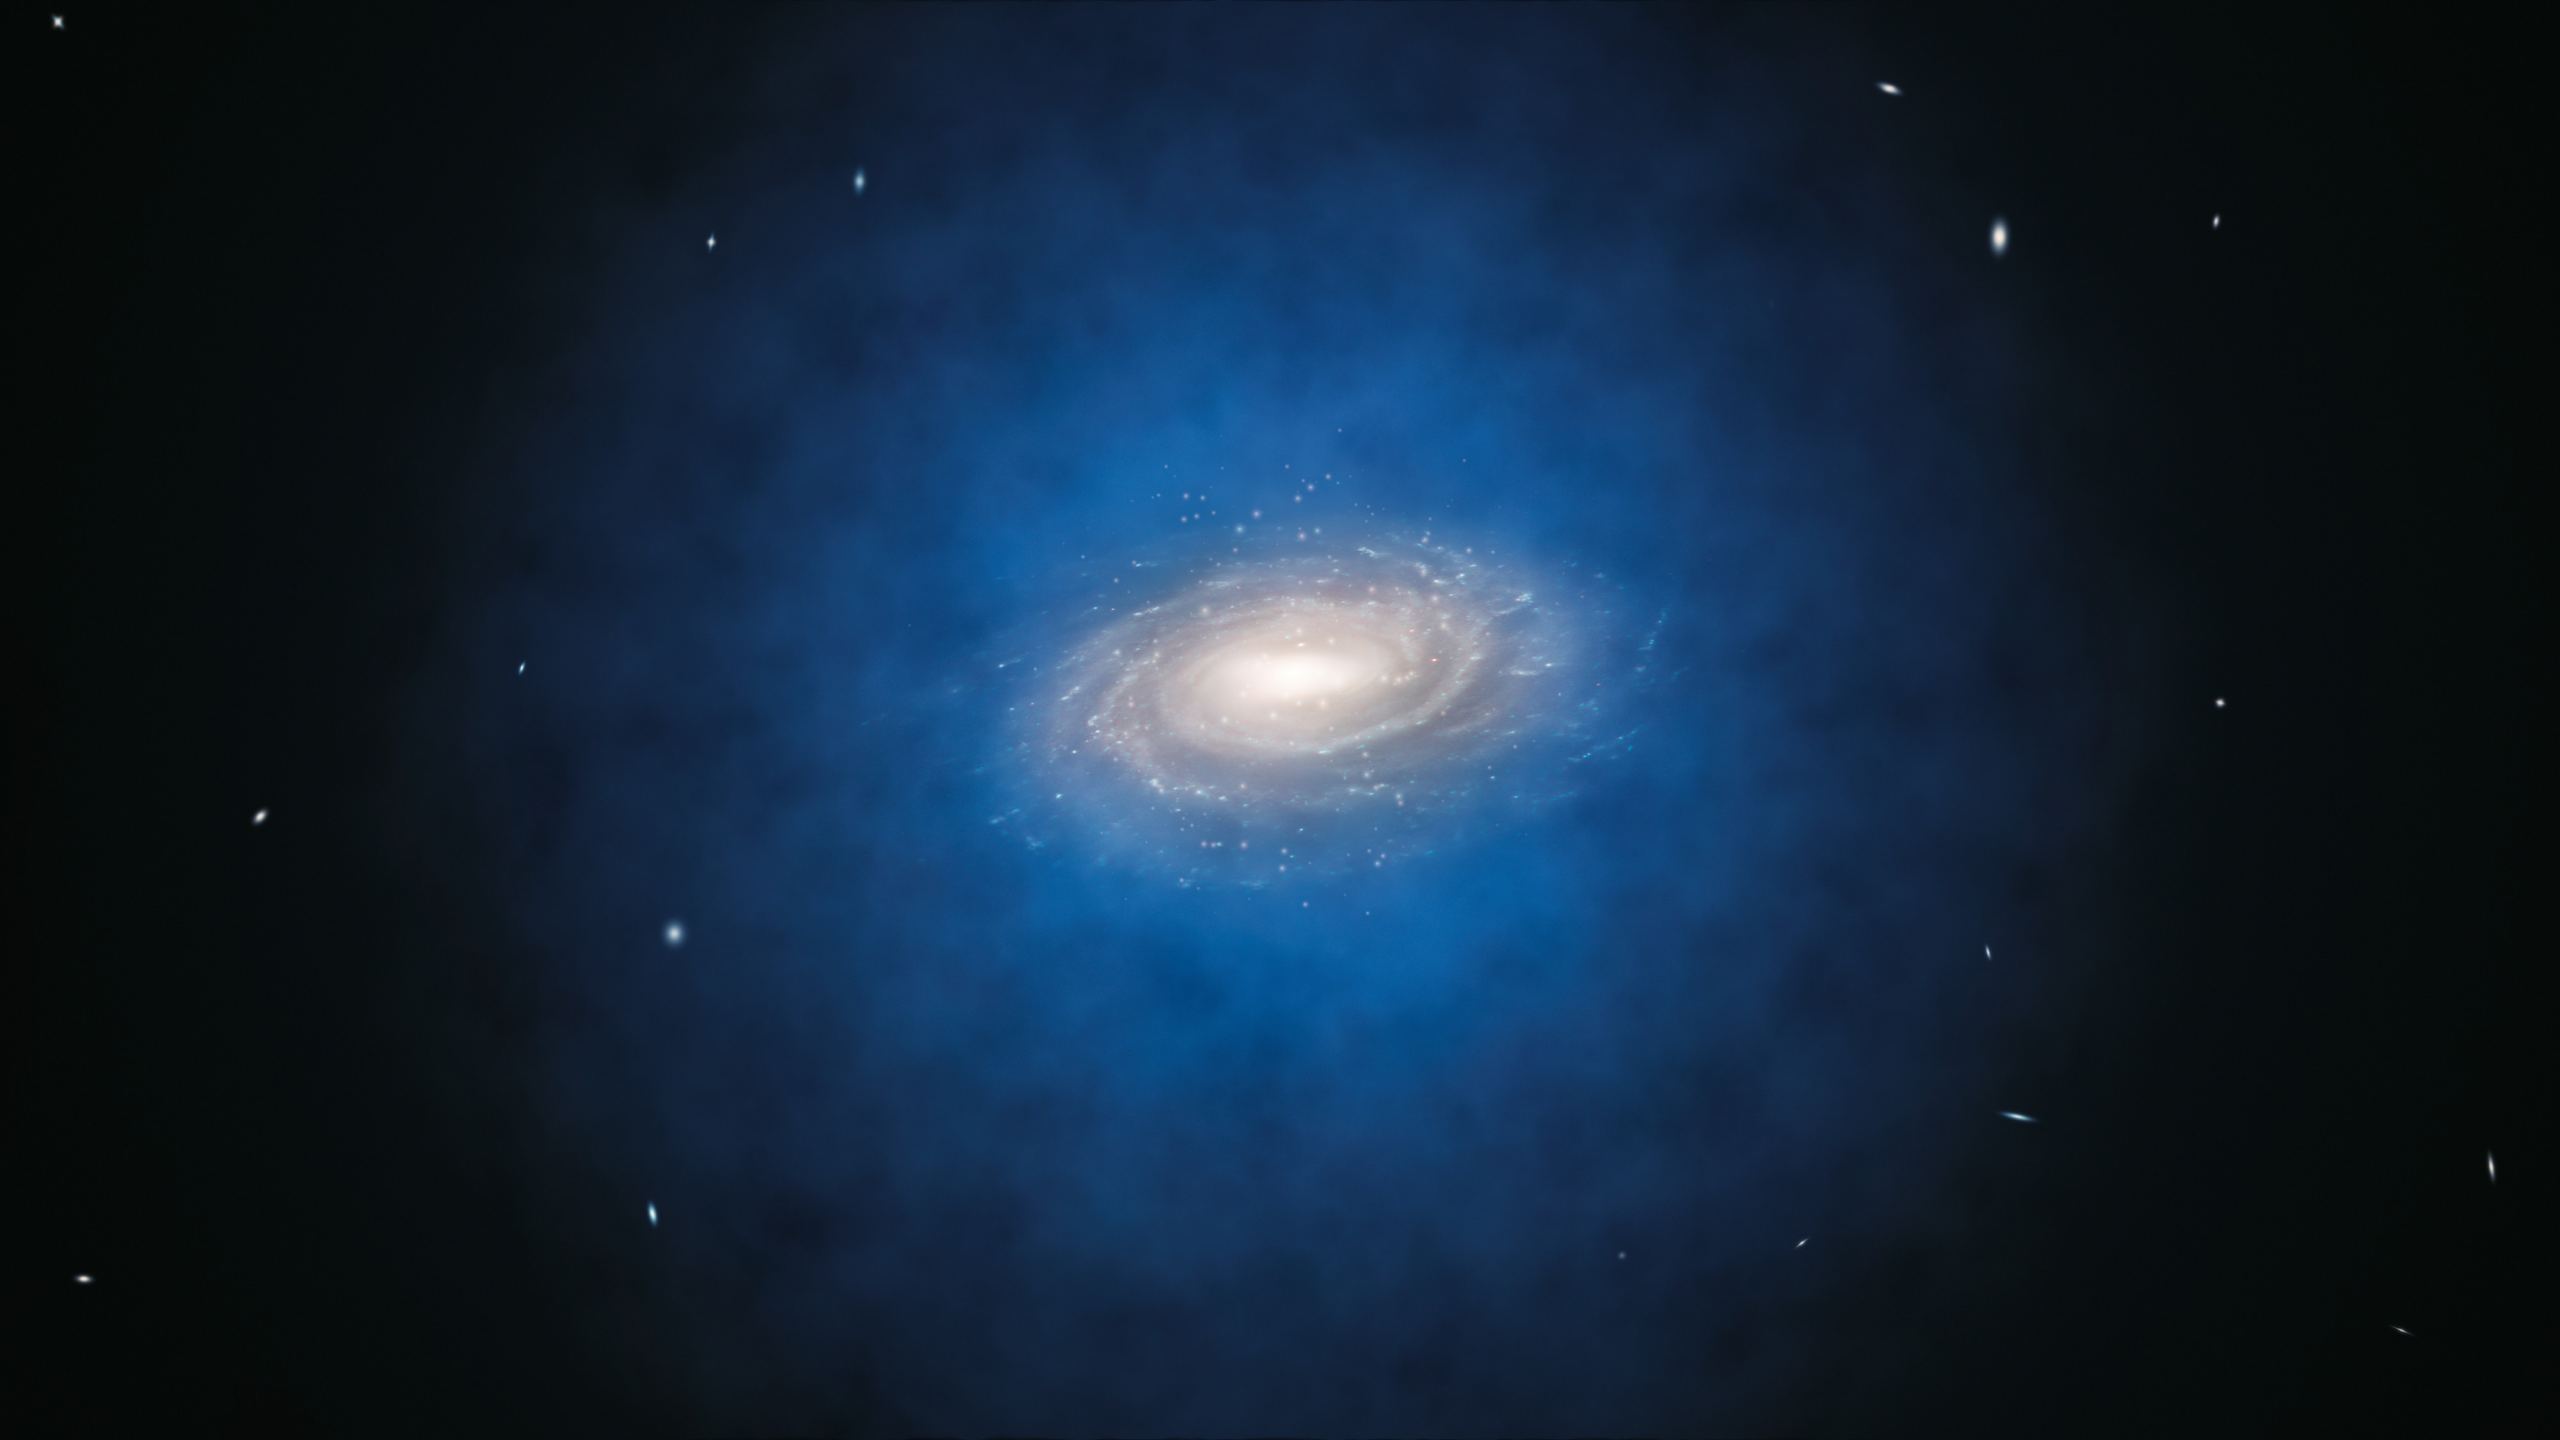 Artist rendering of the dark matter halo surrounding our galaxy. For quasars, the dark matter halos are much more massive. Credit: ESO/L. Calçada